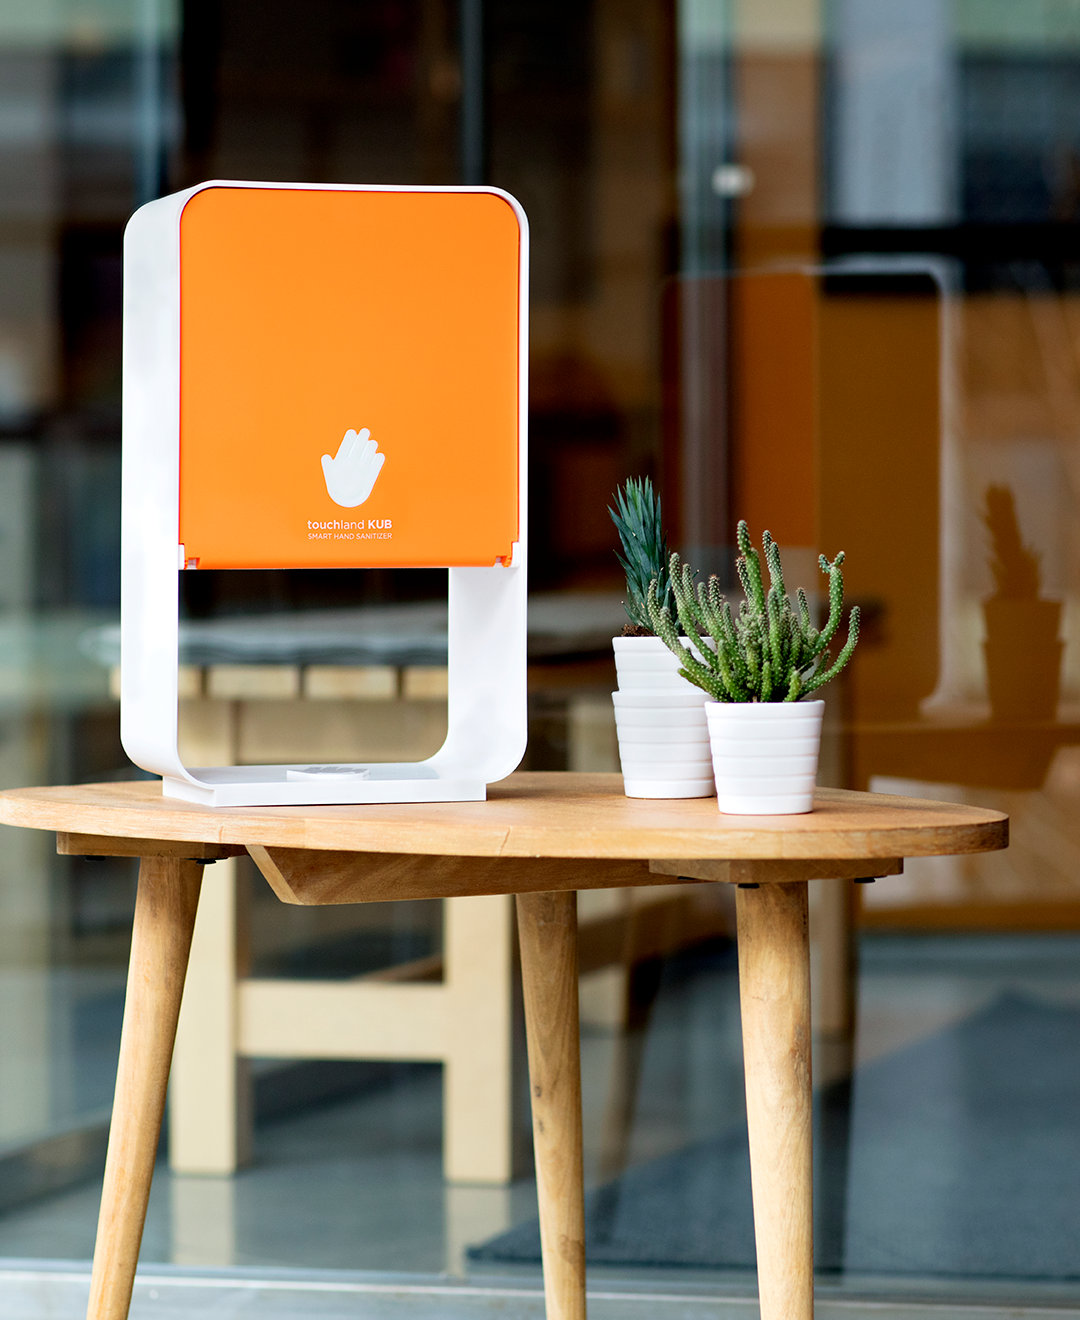 Orange kub dispenser on wooden table outside office next to chair